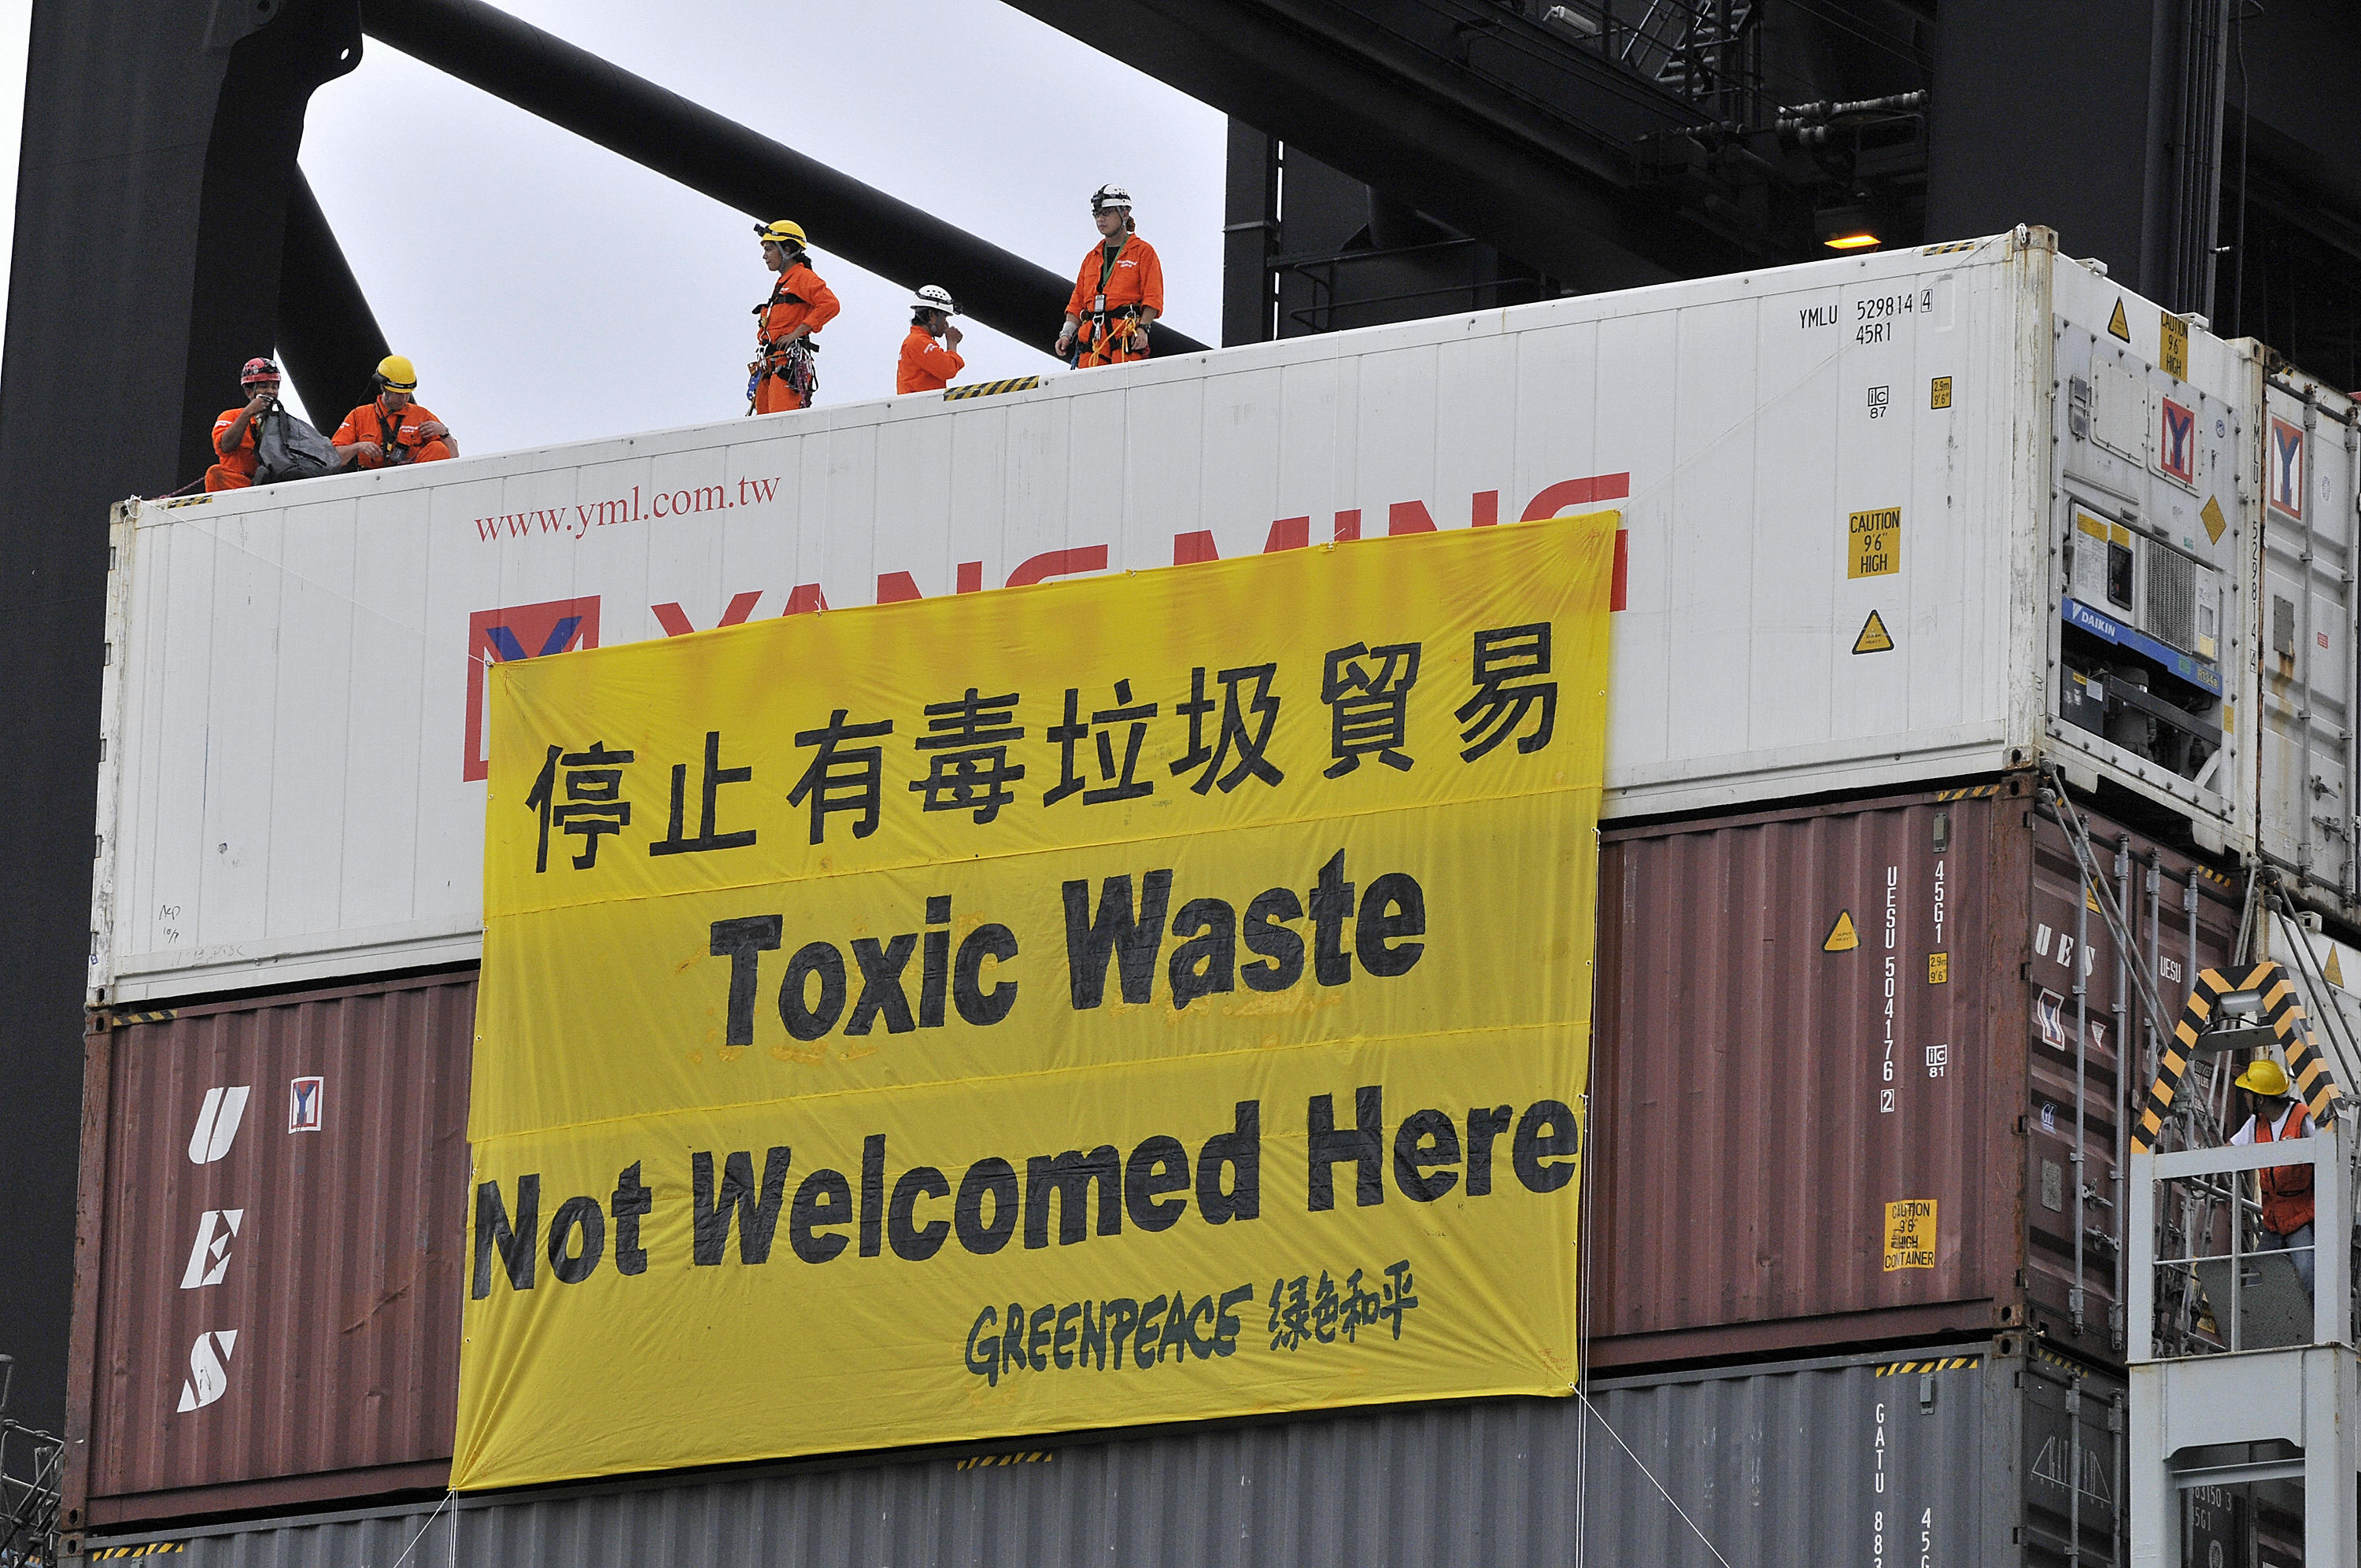 Greenpeace activists lower a banner on a cargo ship allegedly carrying illegal US electronic waste shipment in Hong Kong on June 14, 2008 (AFP/Getty Images)